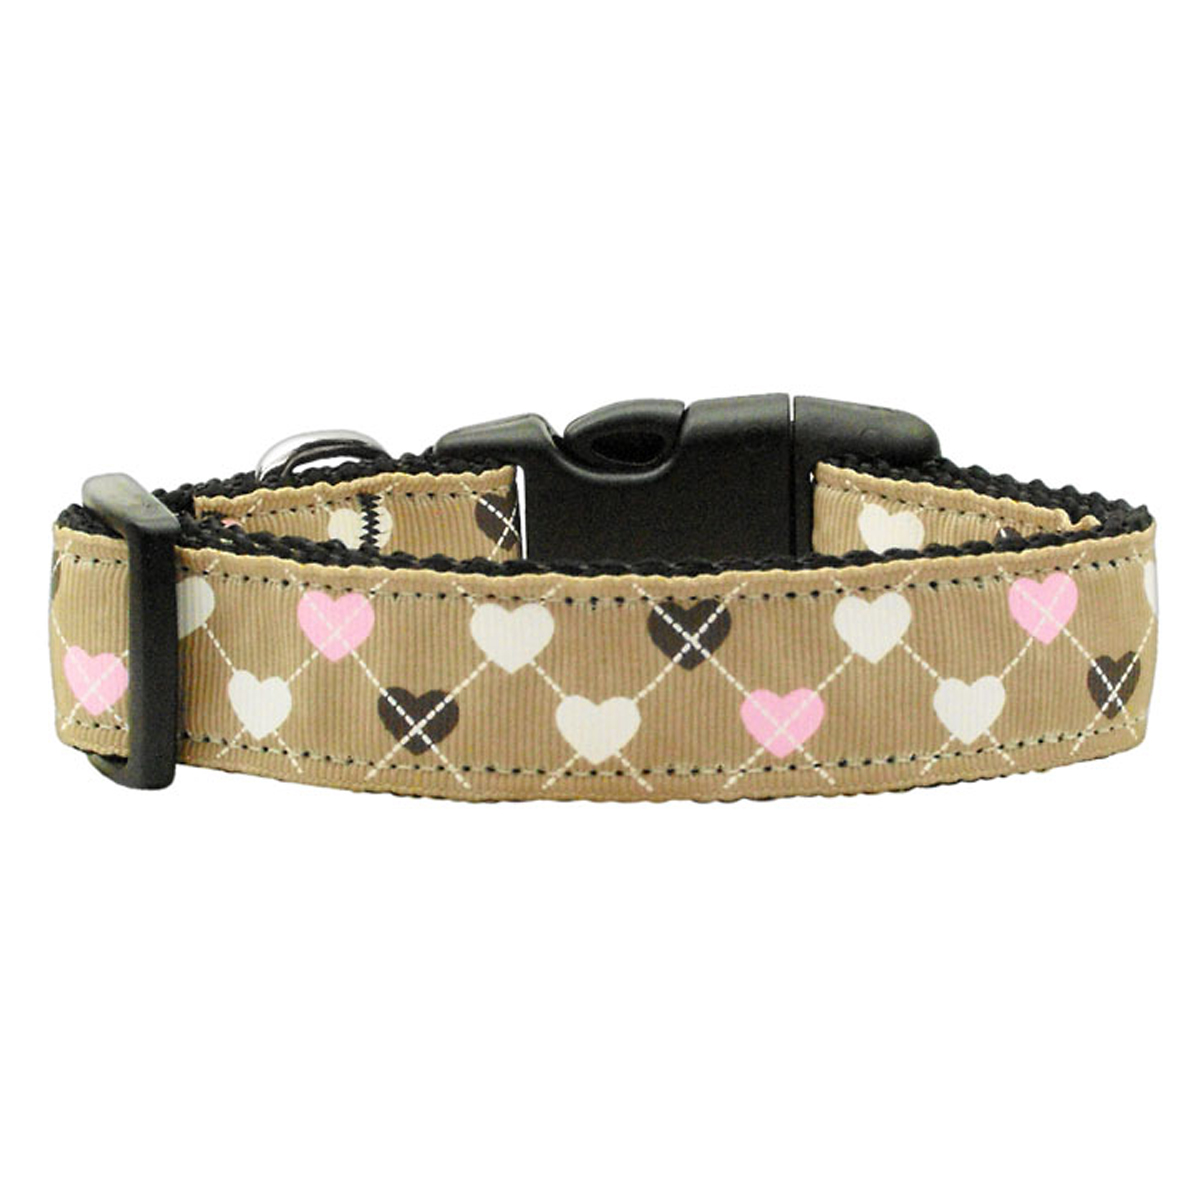 Compare prices for Baxter XSmall Dog Collar (M58073) in official stores